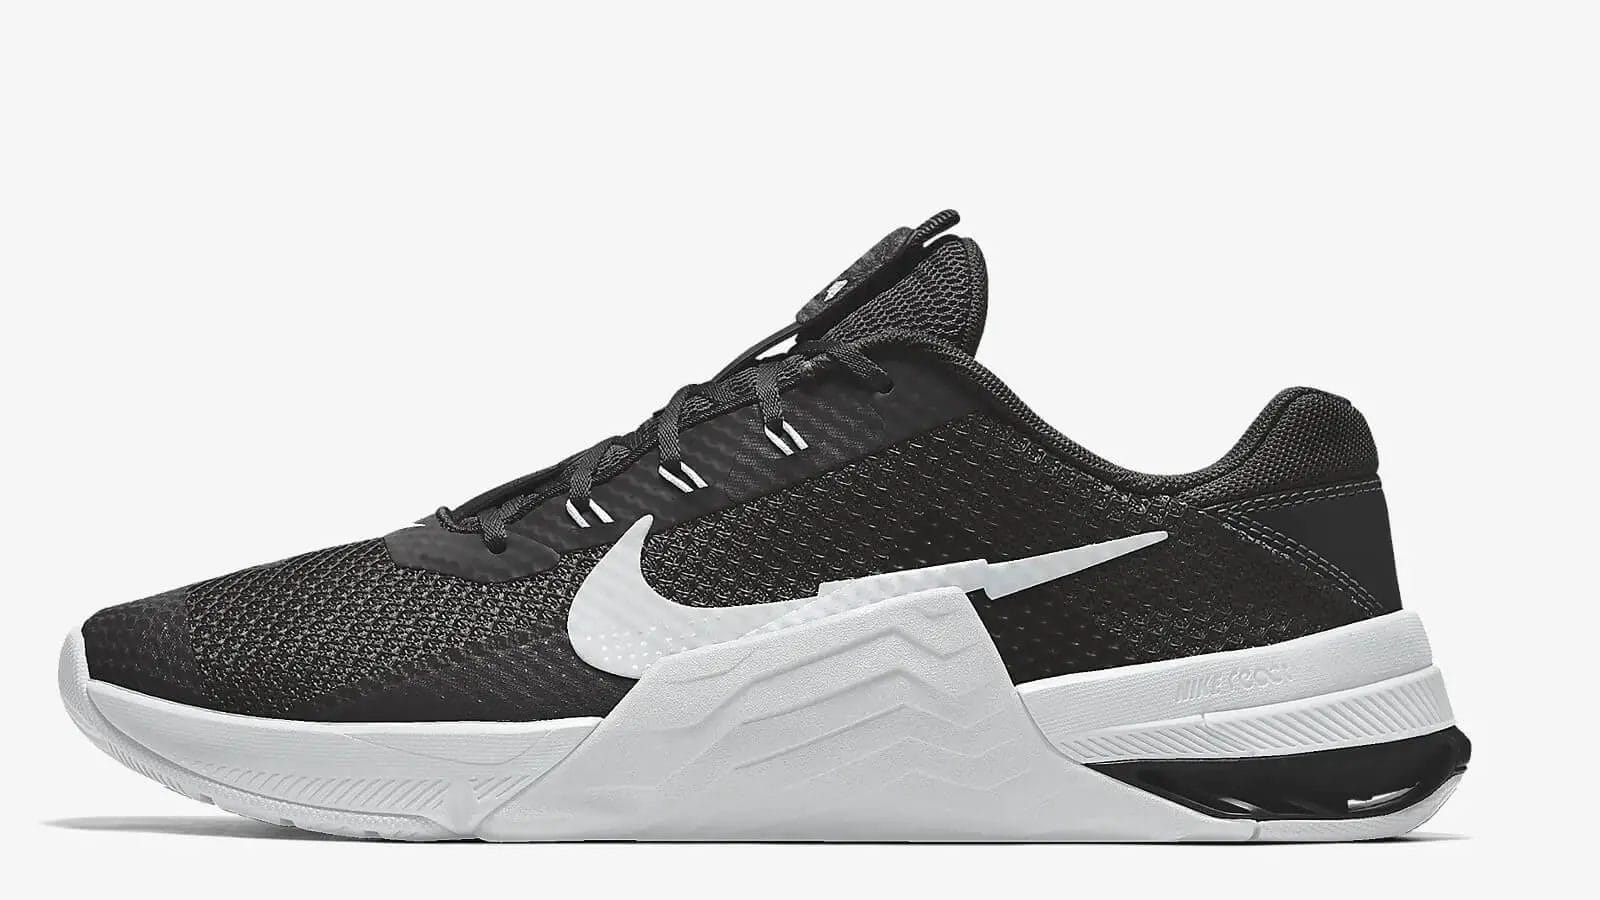 Nike Metcon 7 preview crossfit shoe in black and white